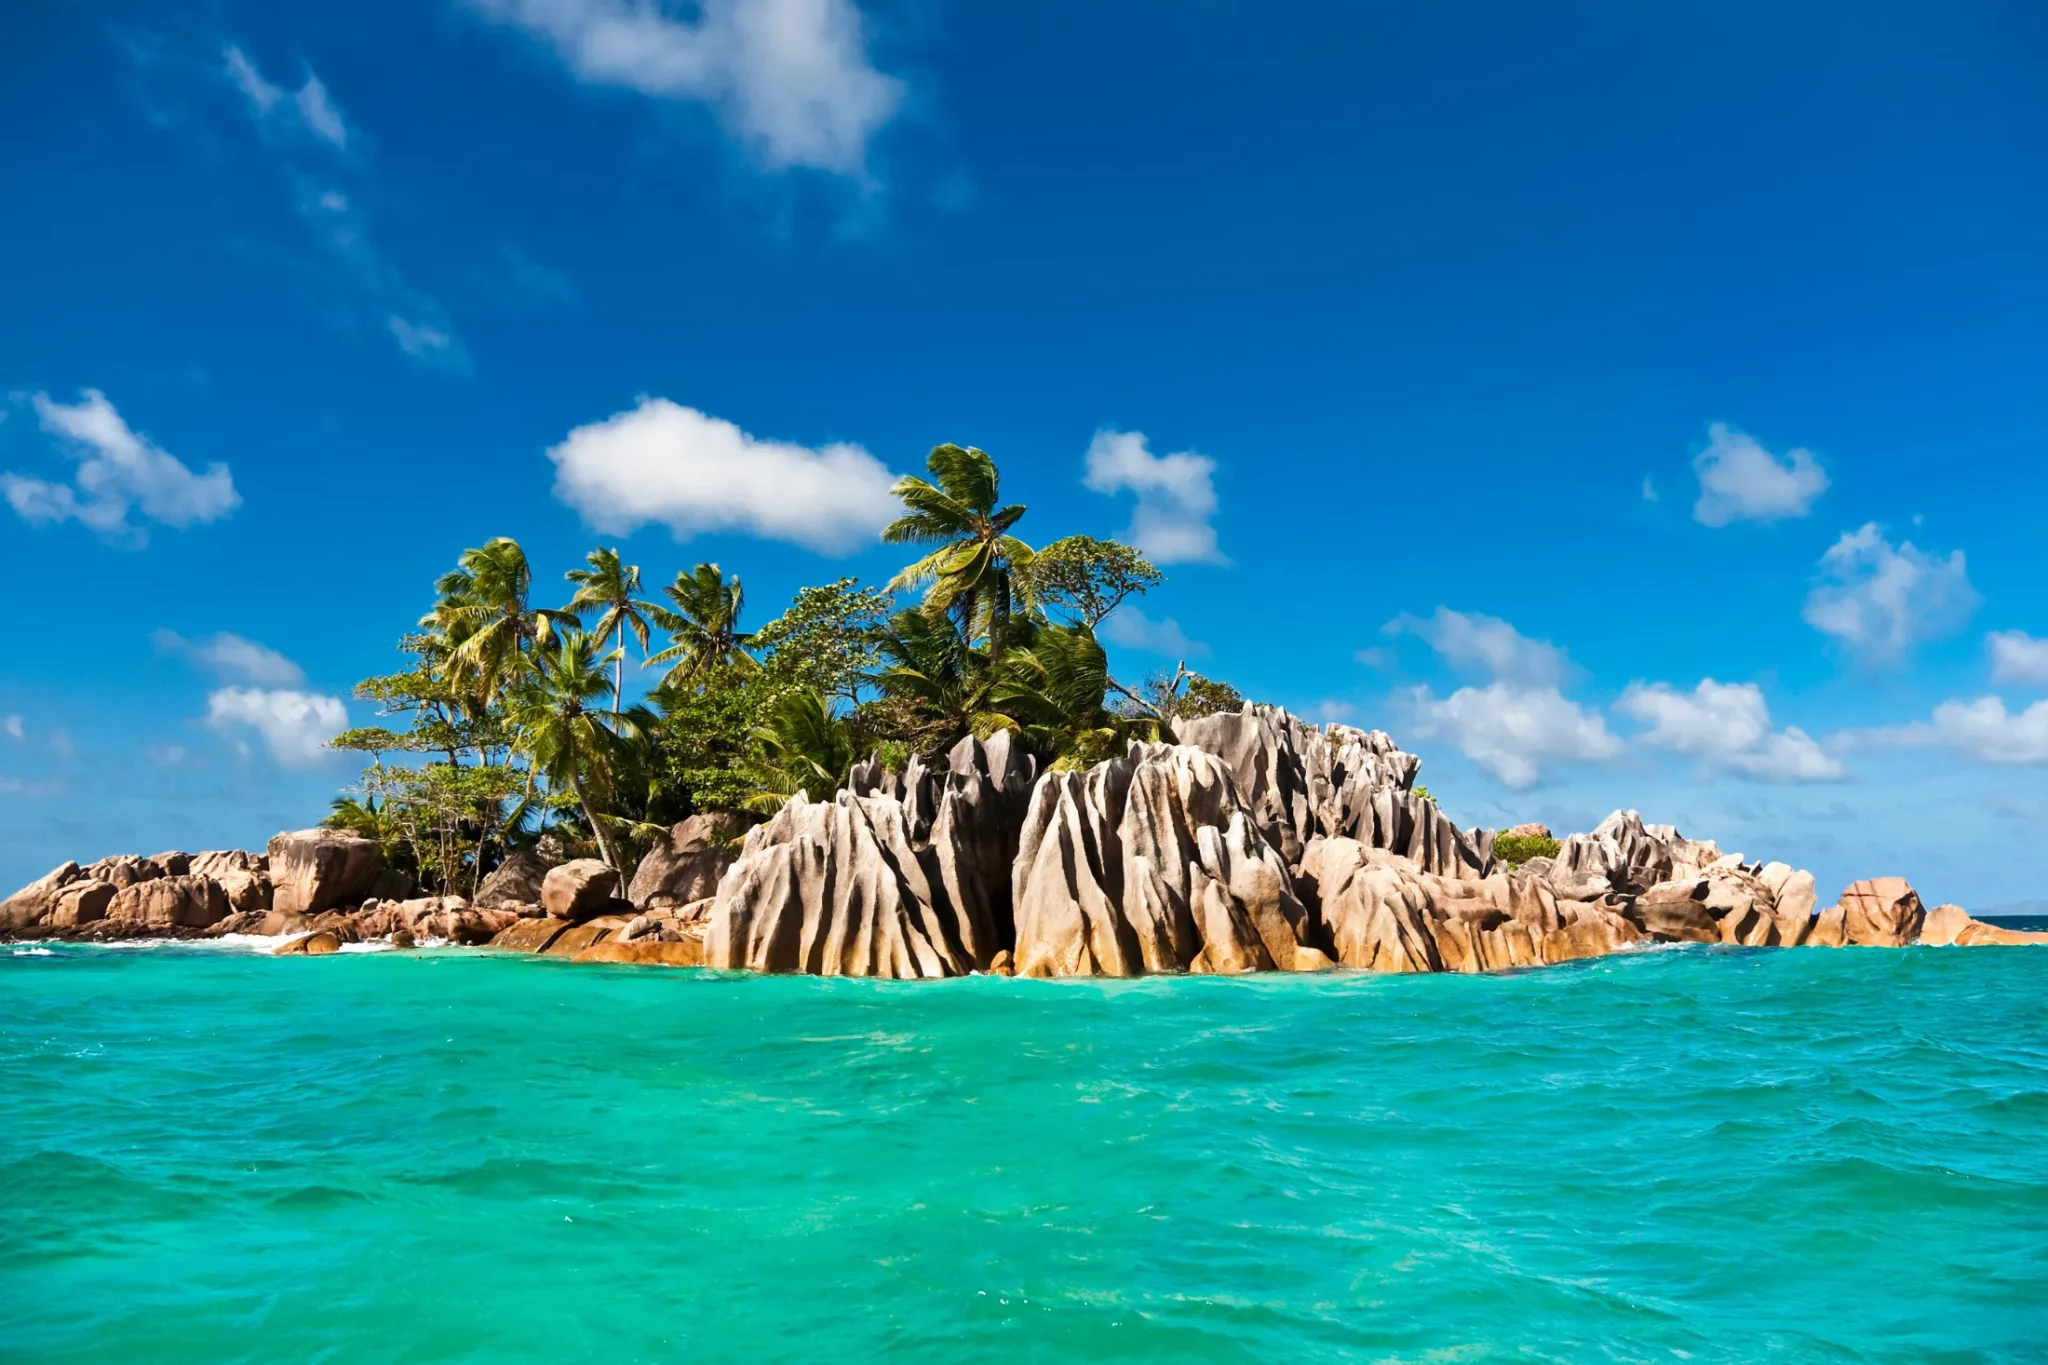 Tropical Island of St. Pierre, perfect for scuba diving in Seychelles.